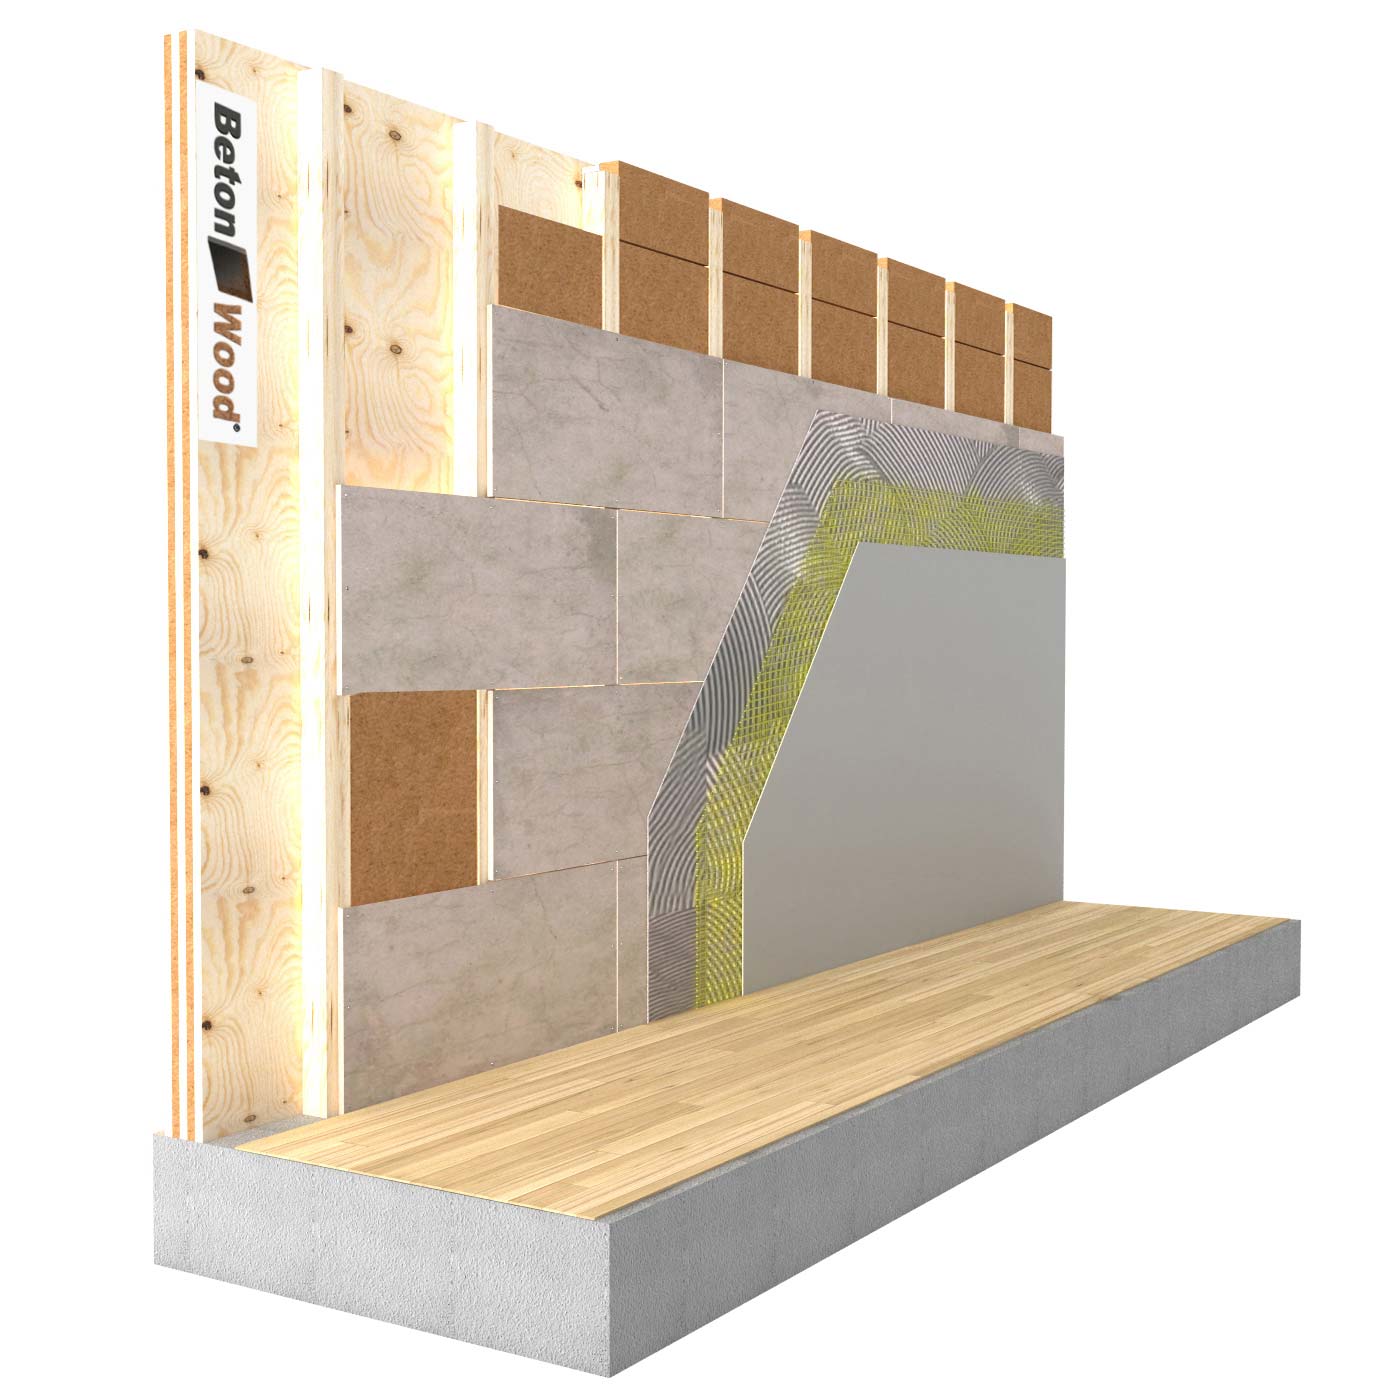 Internal insulation system in Protect dry Fiber Wood and cement bonded particle board